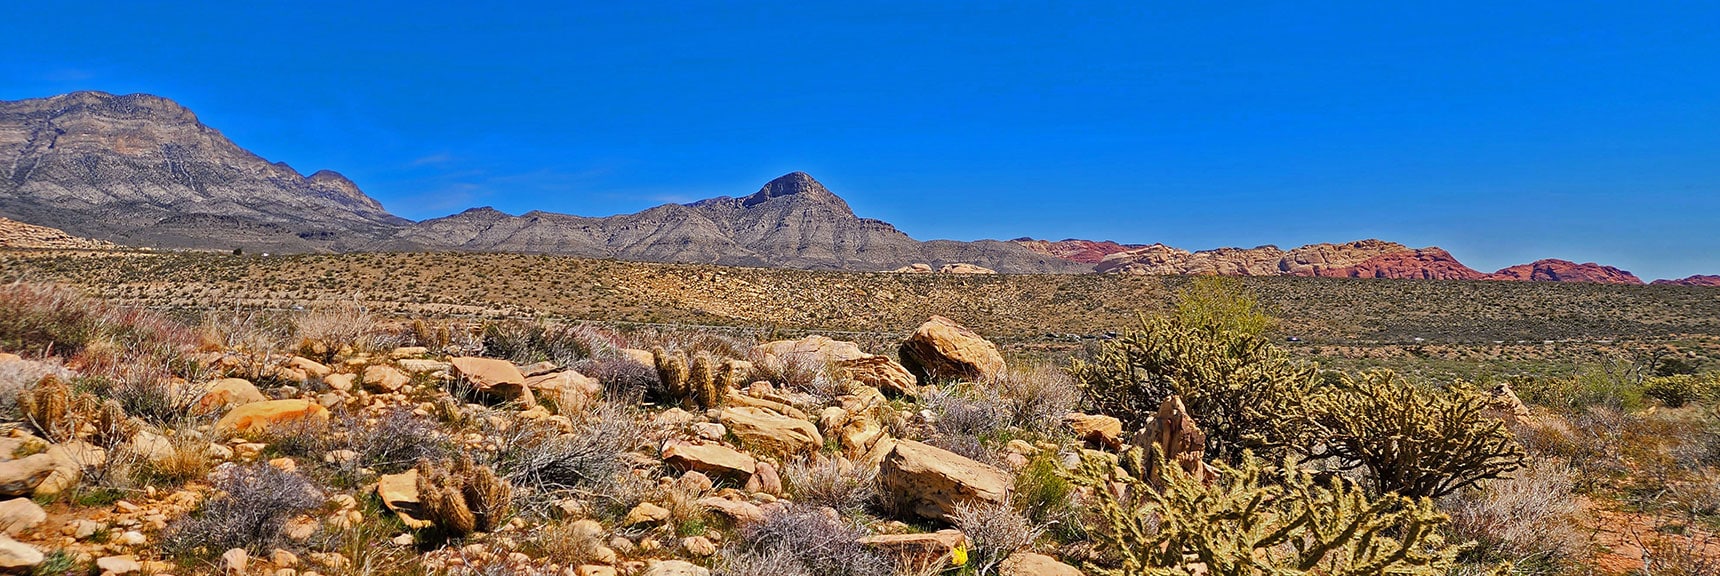 Toward the South High Point on SMYC Trail. Turtlehead Peak & Calico Hills on Horizon | SMYC Trail | Red Rock Canyon National Conservation Area, Nevada | David Smith | LasVegasAreaTrails.com